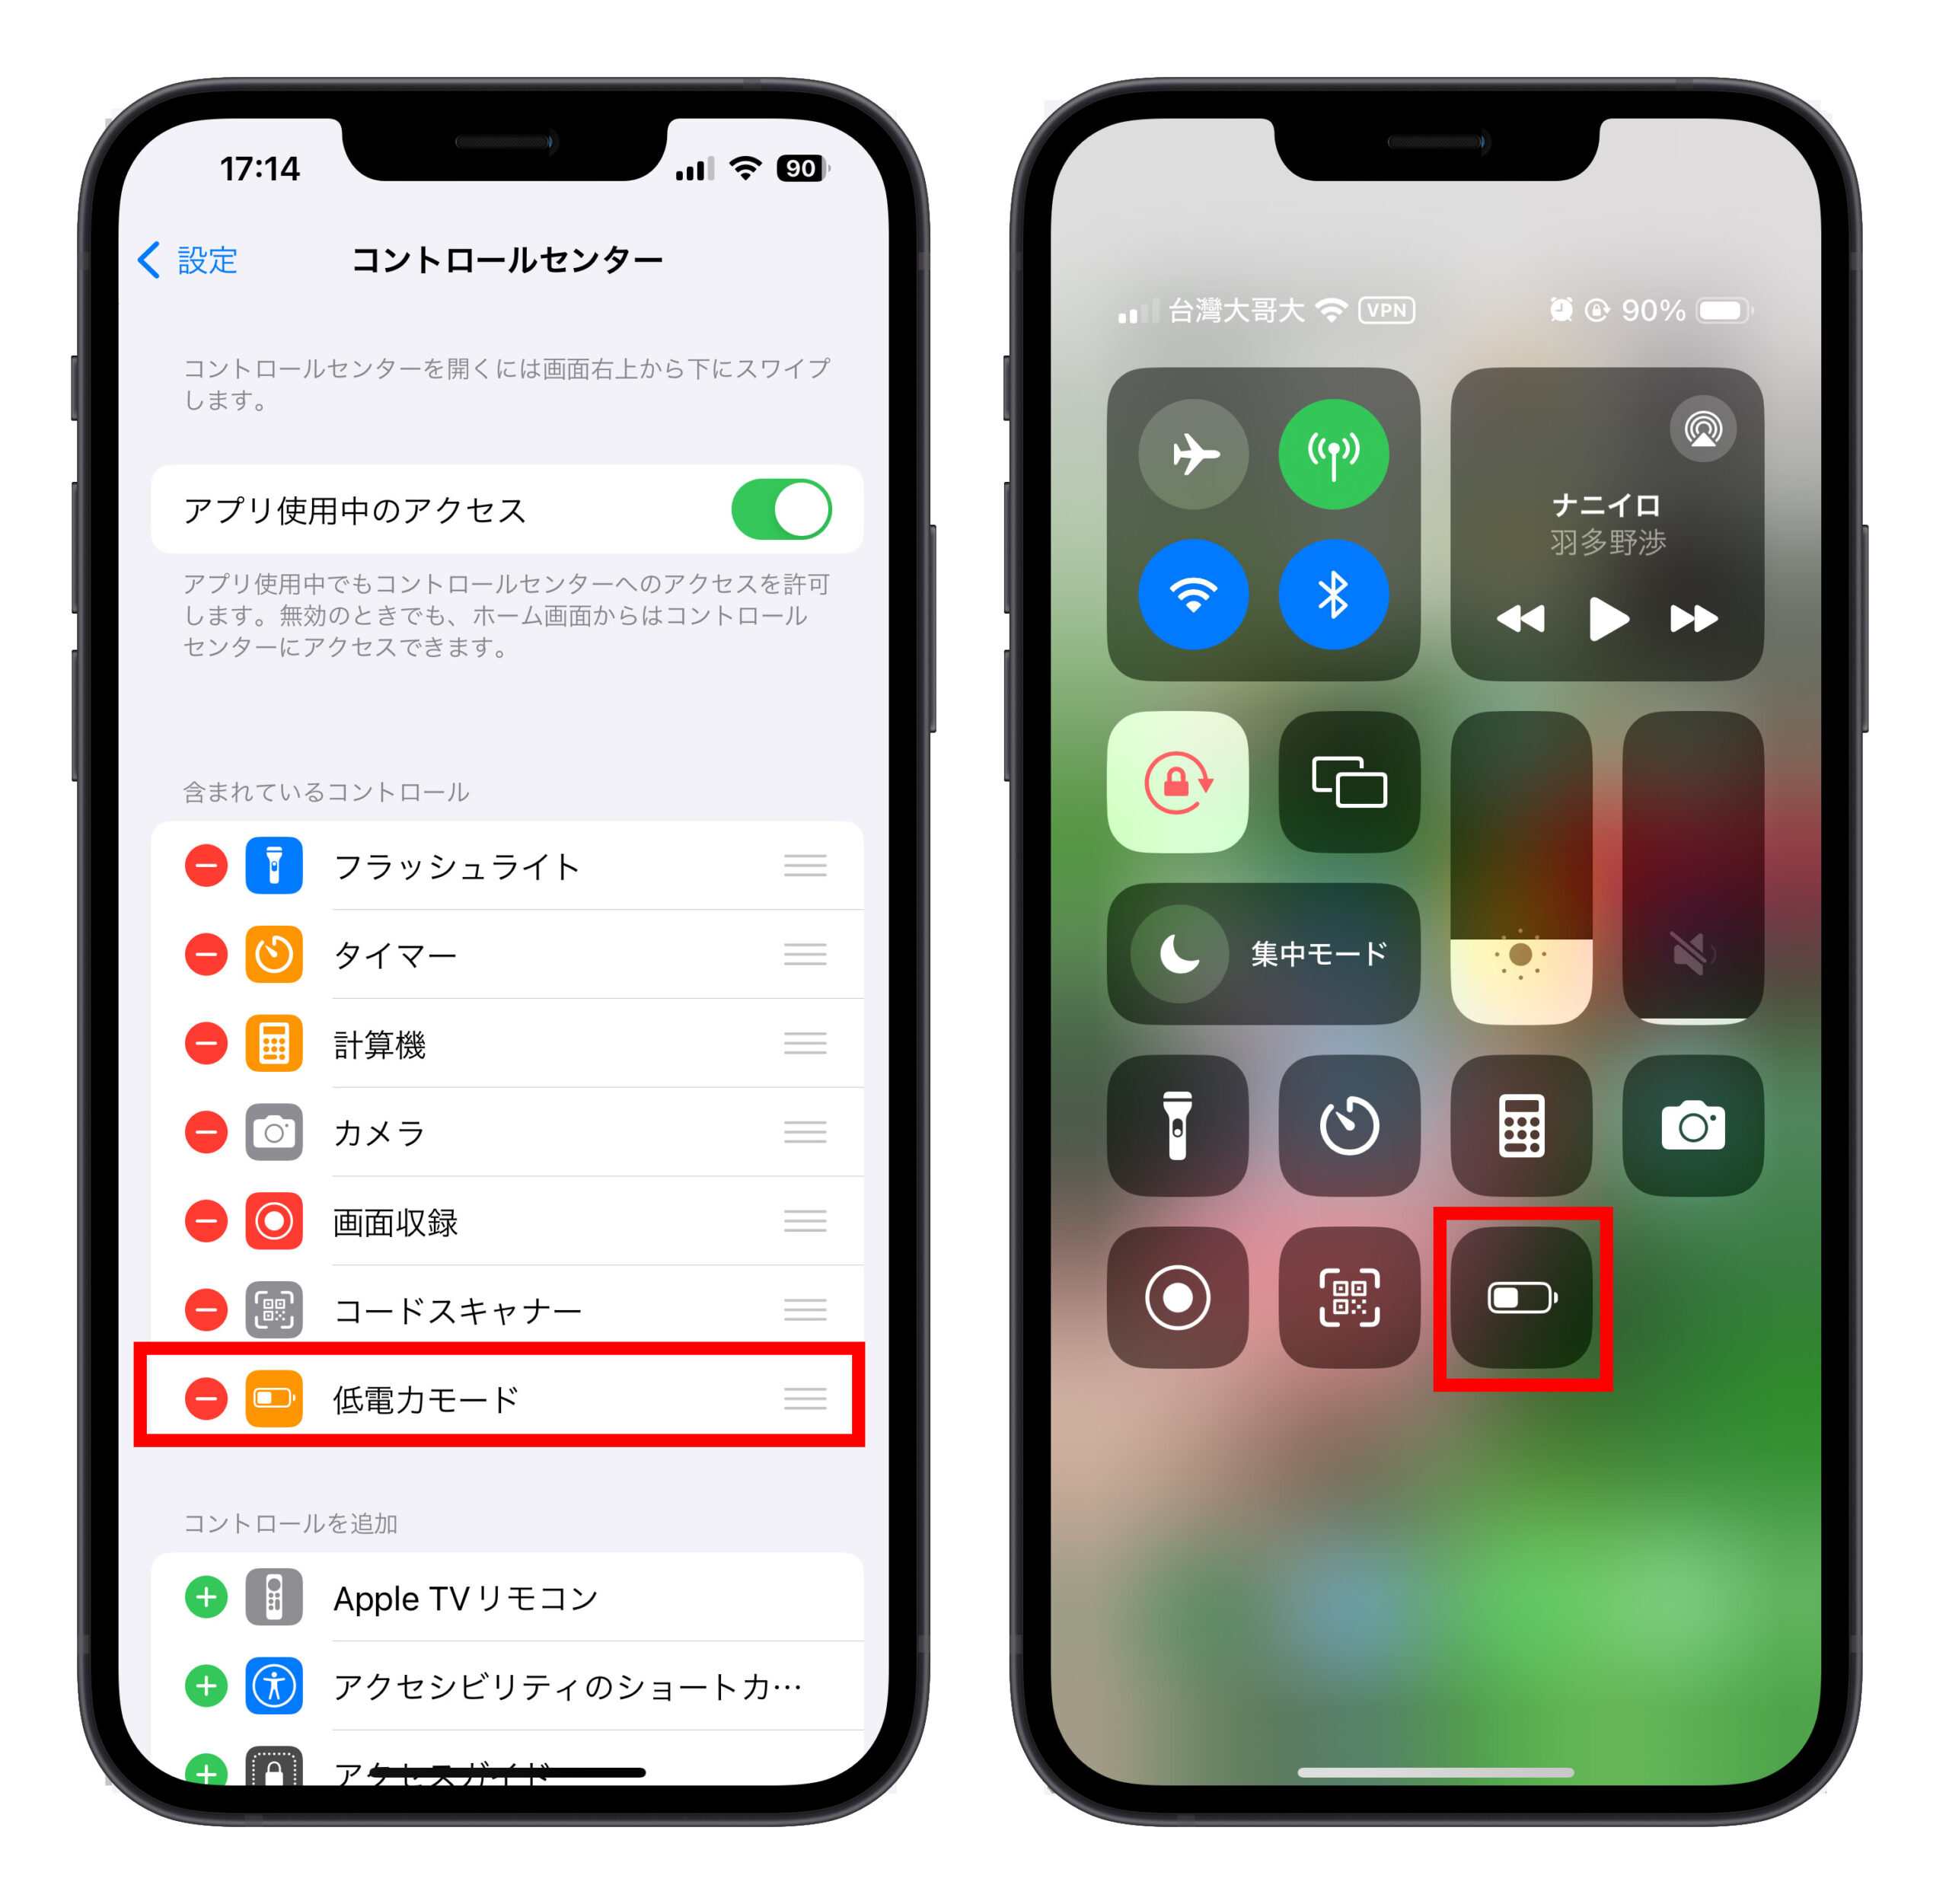 iPhone コントロールセンター 低電力モード